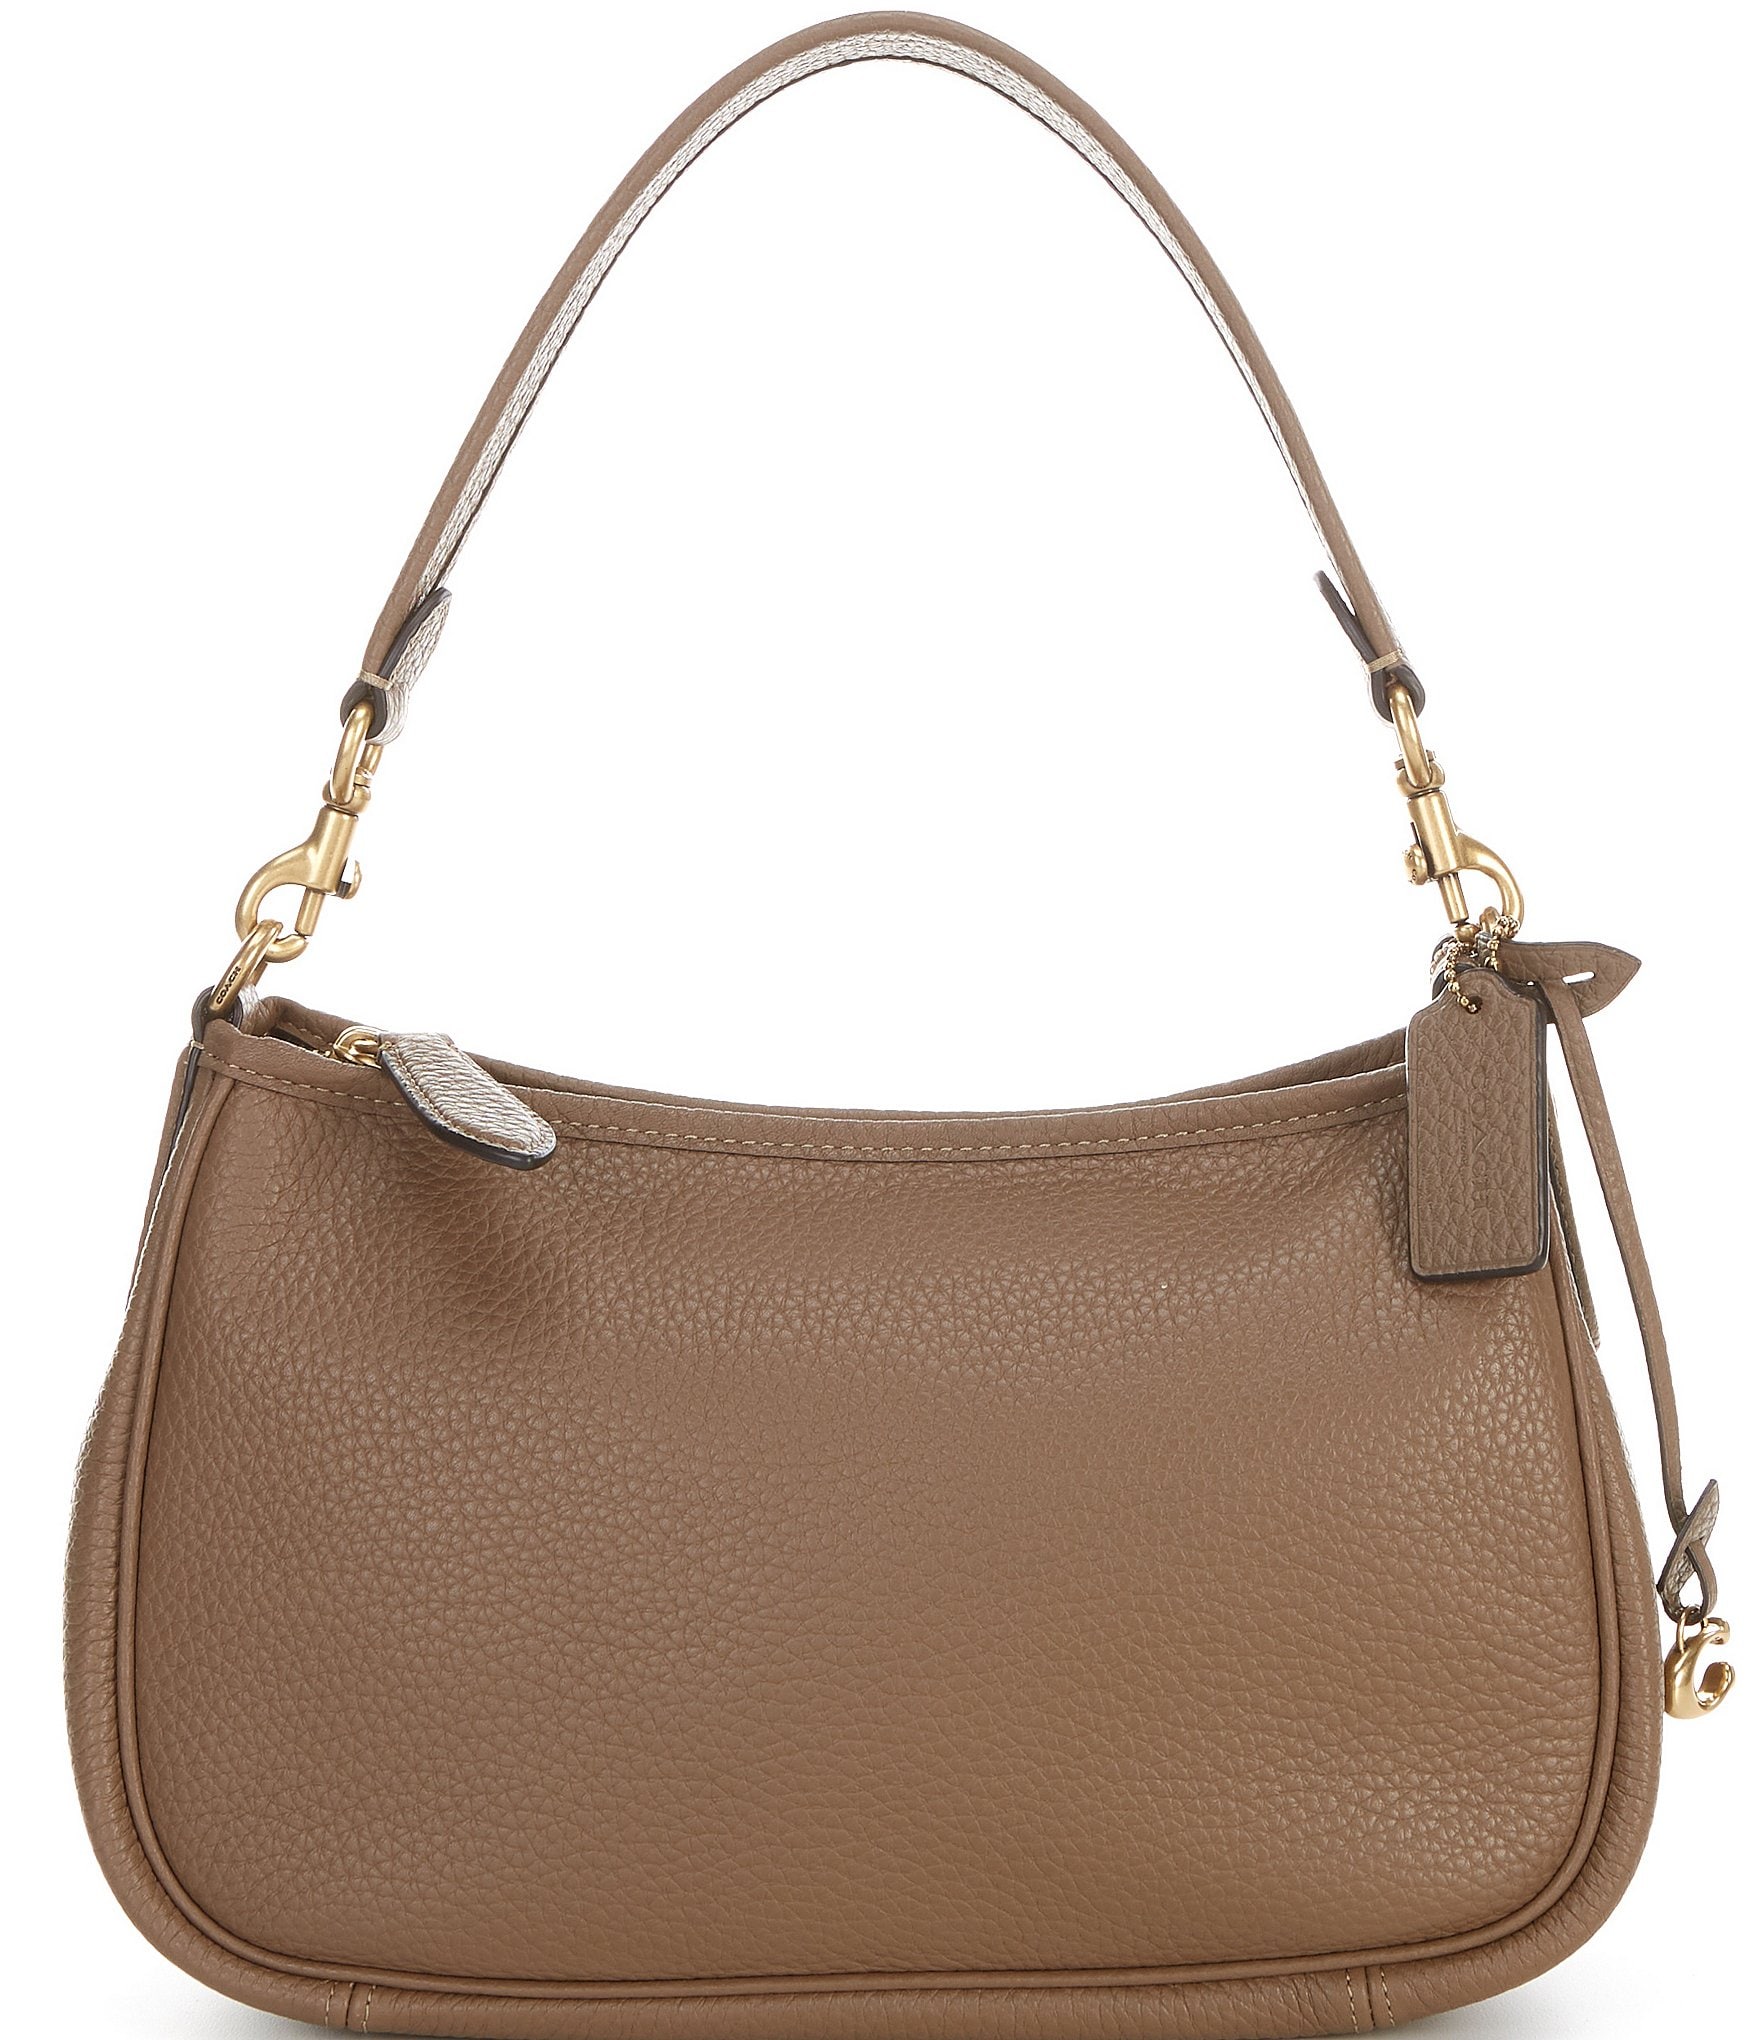 Coach Outlet massive sale offers spring bags, wallets, more up to